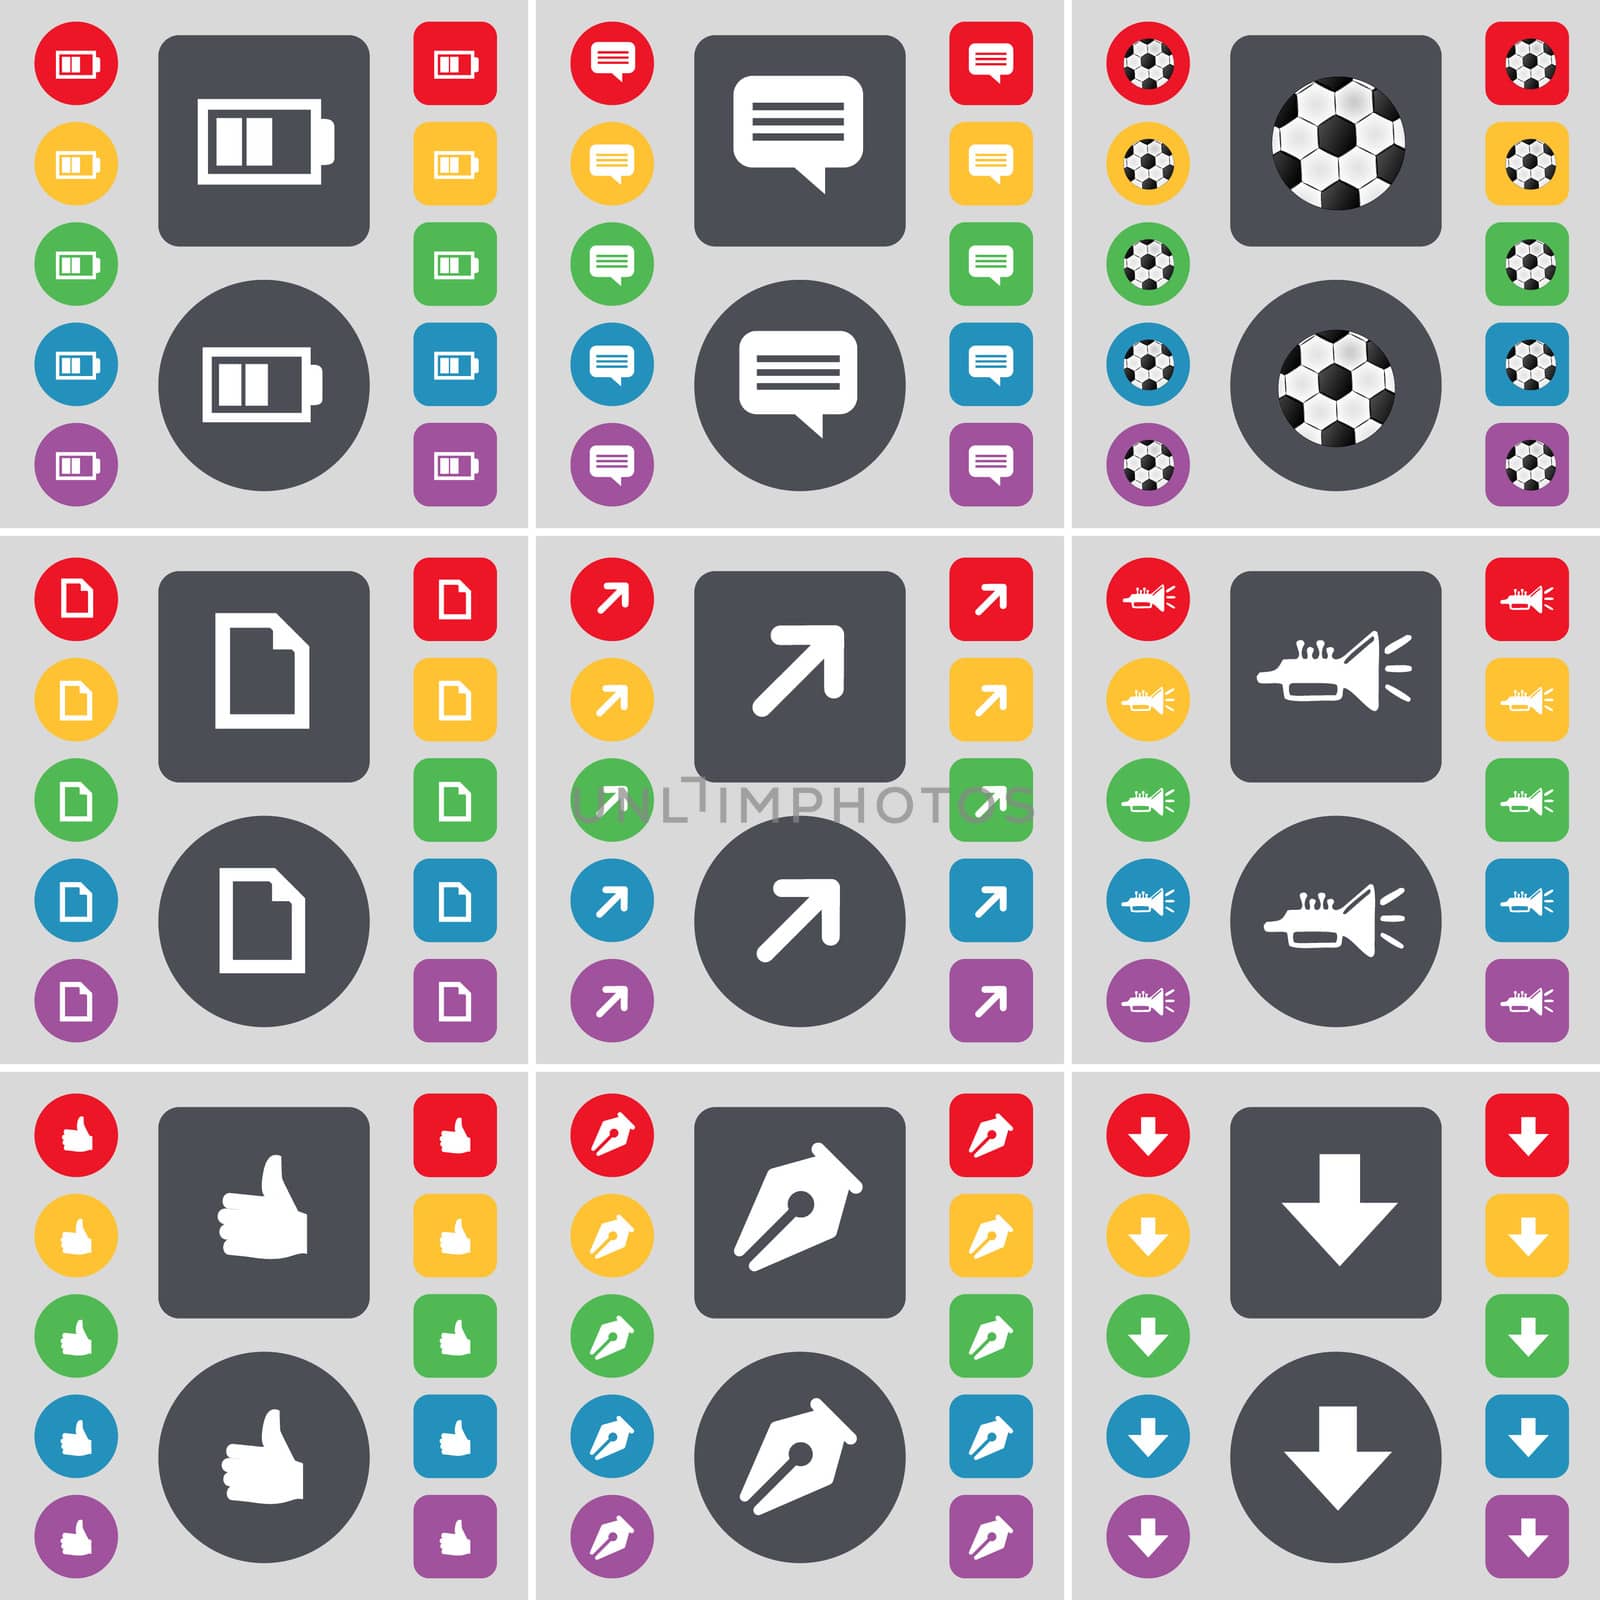 Battery, Chat bubble, Ball, File, Full screen, Trumped, Like, Ink pen, Arrow down icon symbol. A large set of flat, colored buttons for your design. illustration